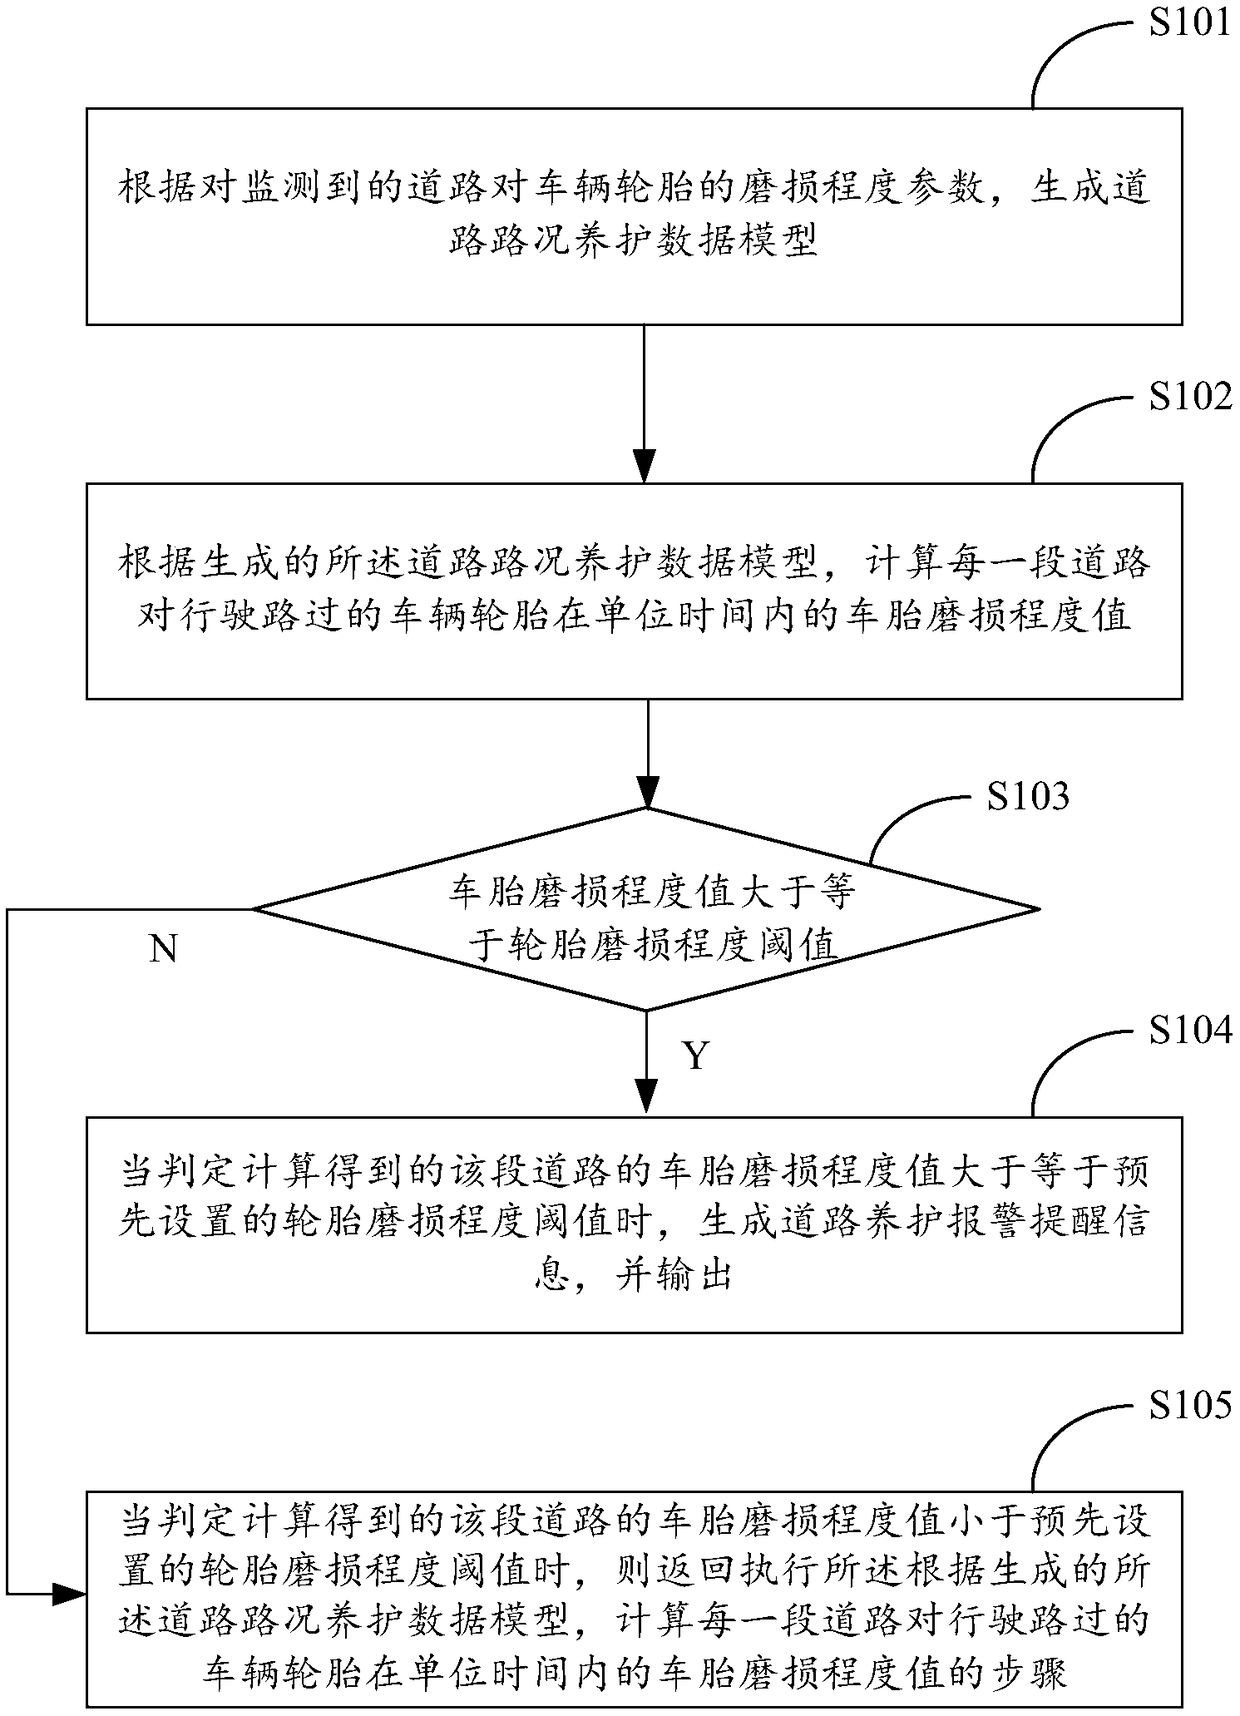 Road health degree monitoring method and system